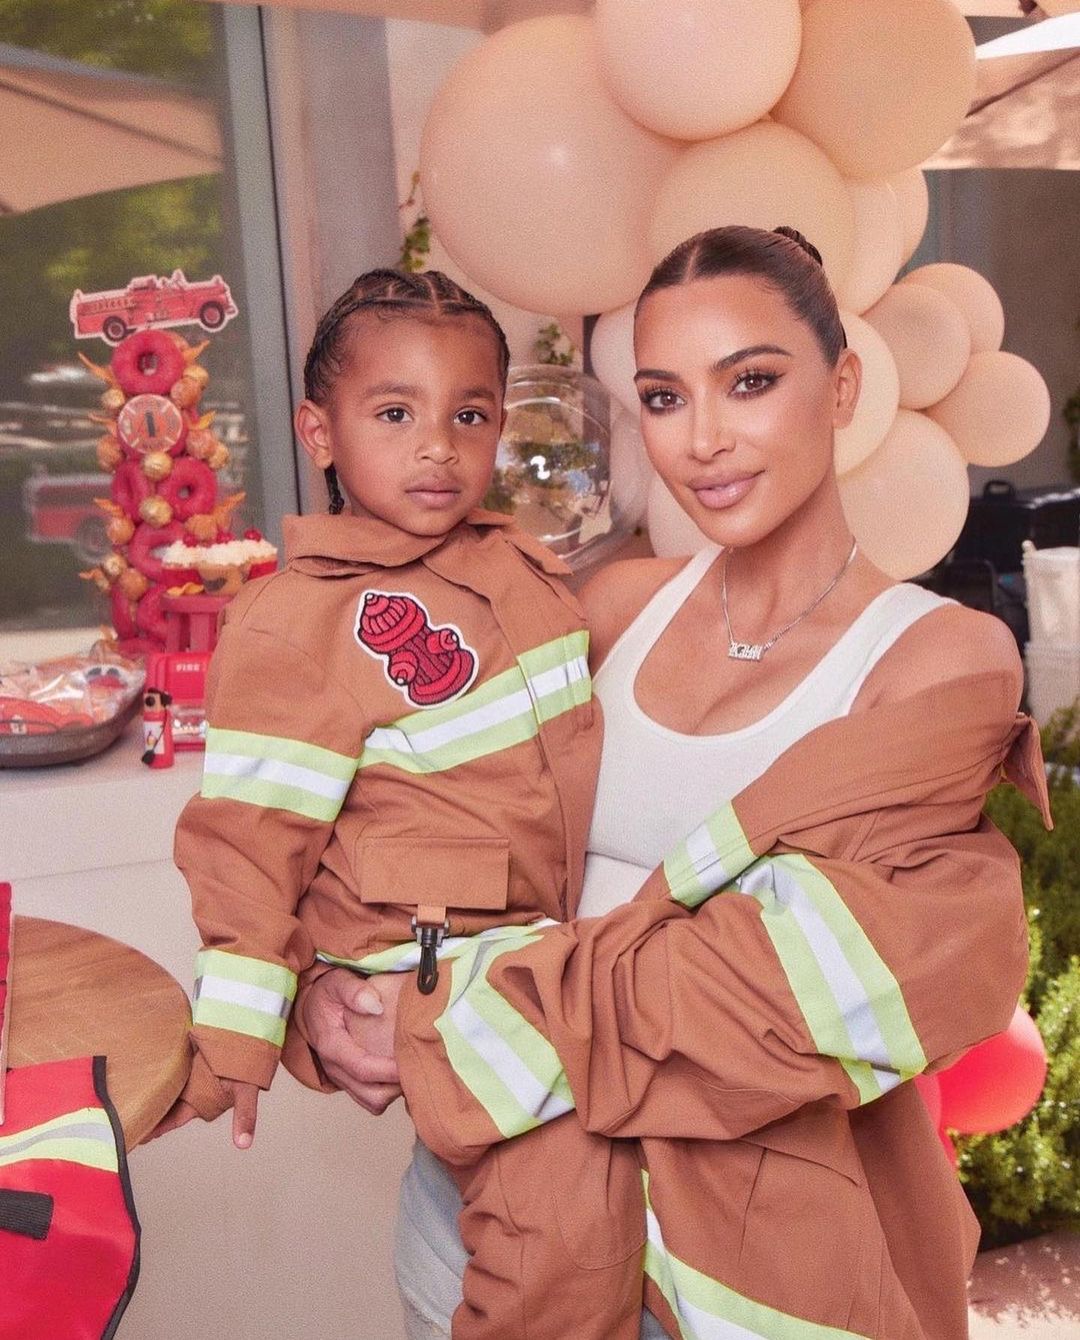 Along with Psalm, Kim shares North, Saint, and Chicago with her ex-husband, Kanye West